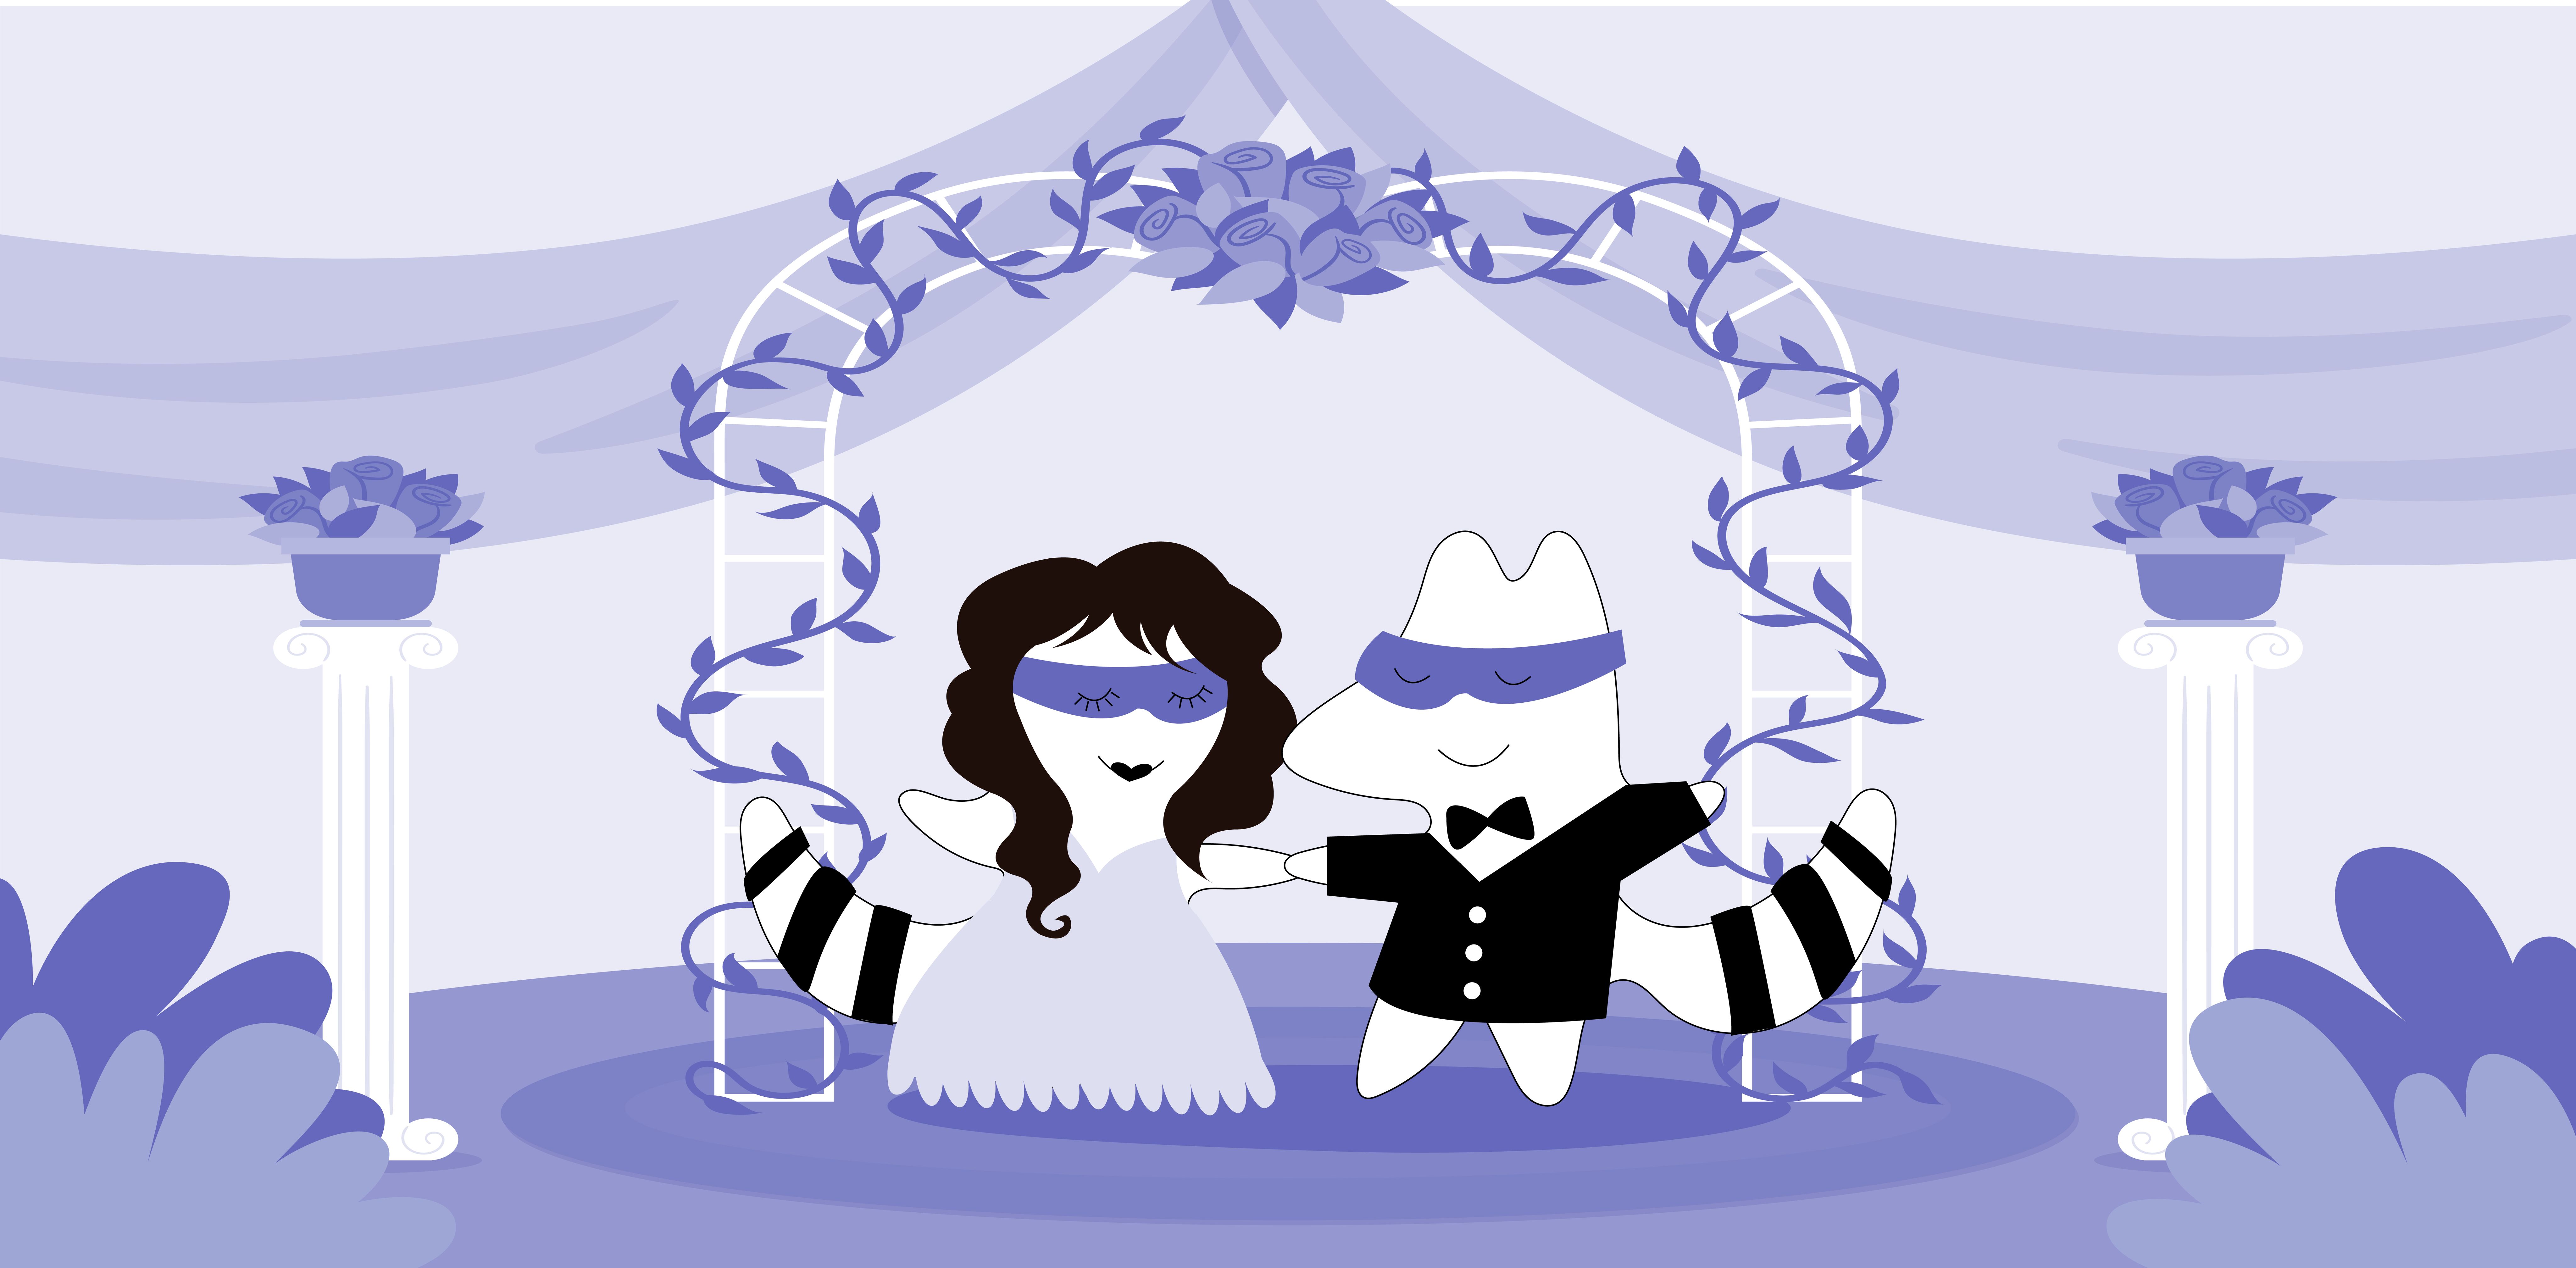 Two characters getting married